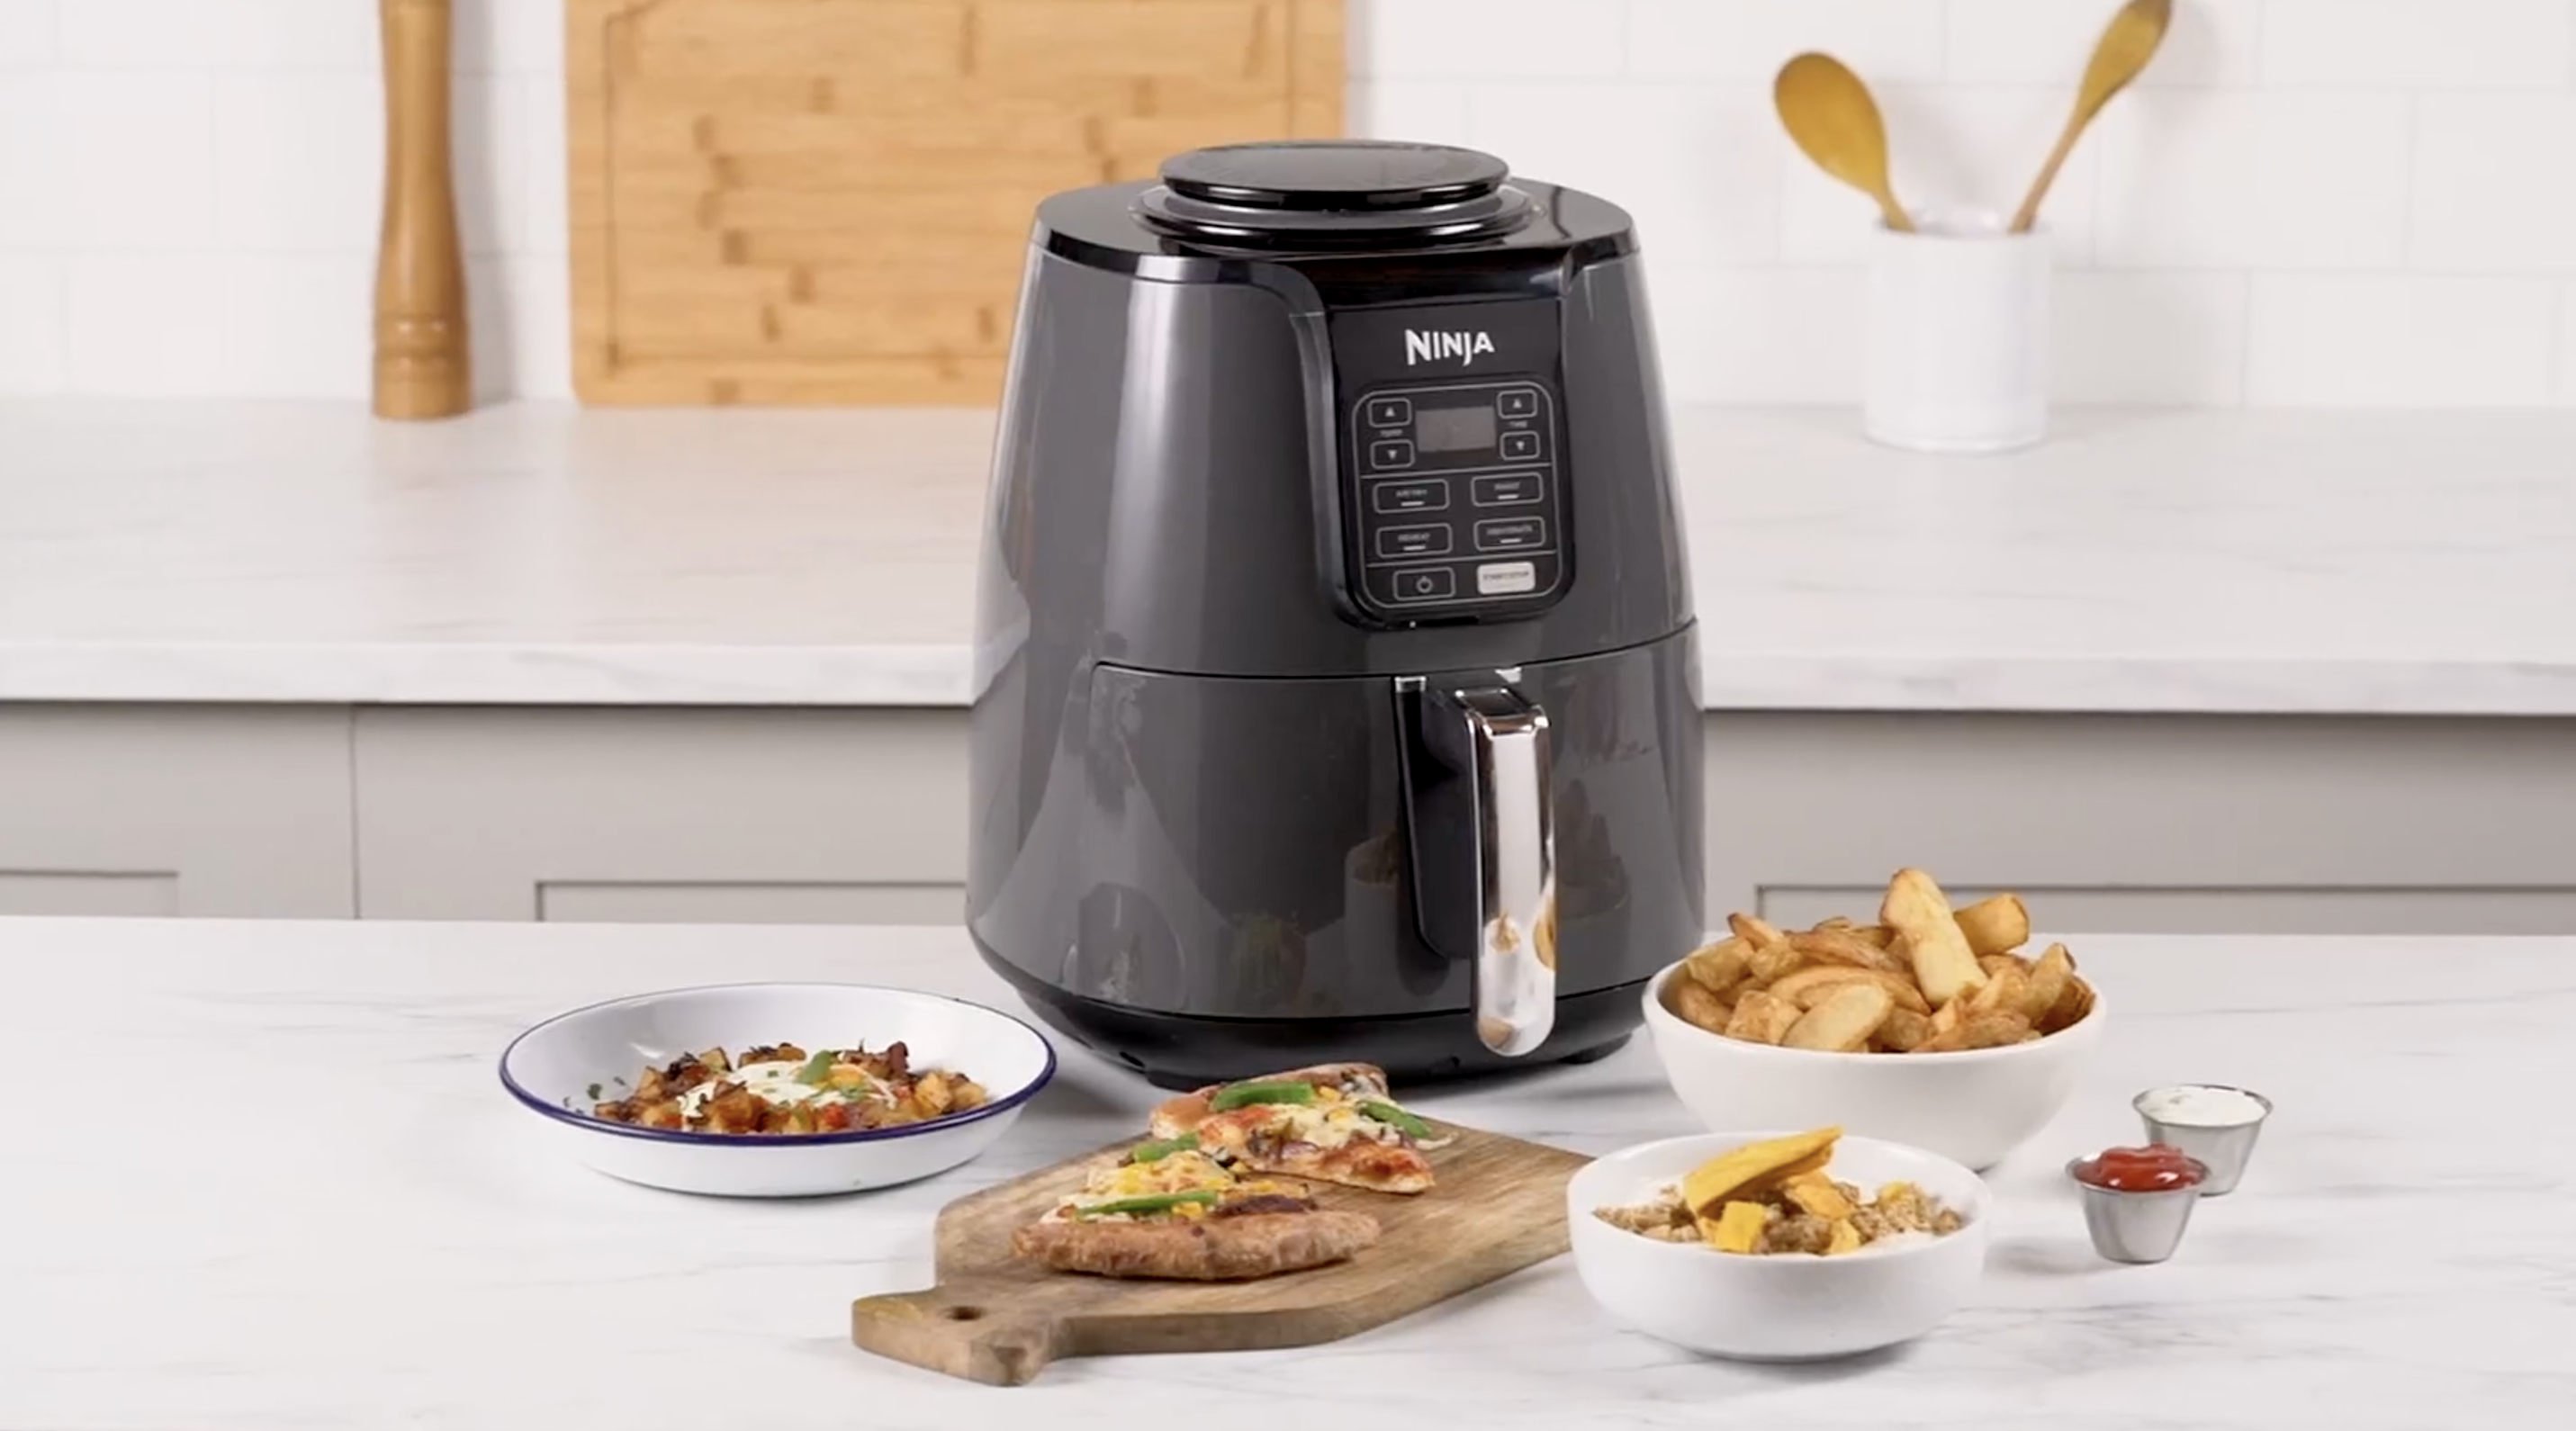 The Ninja 3L Air Fryer is 50% off in the Amazon Prime Day sale